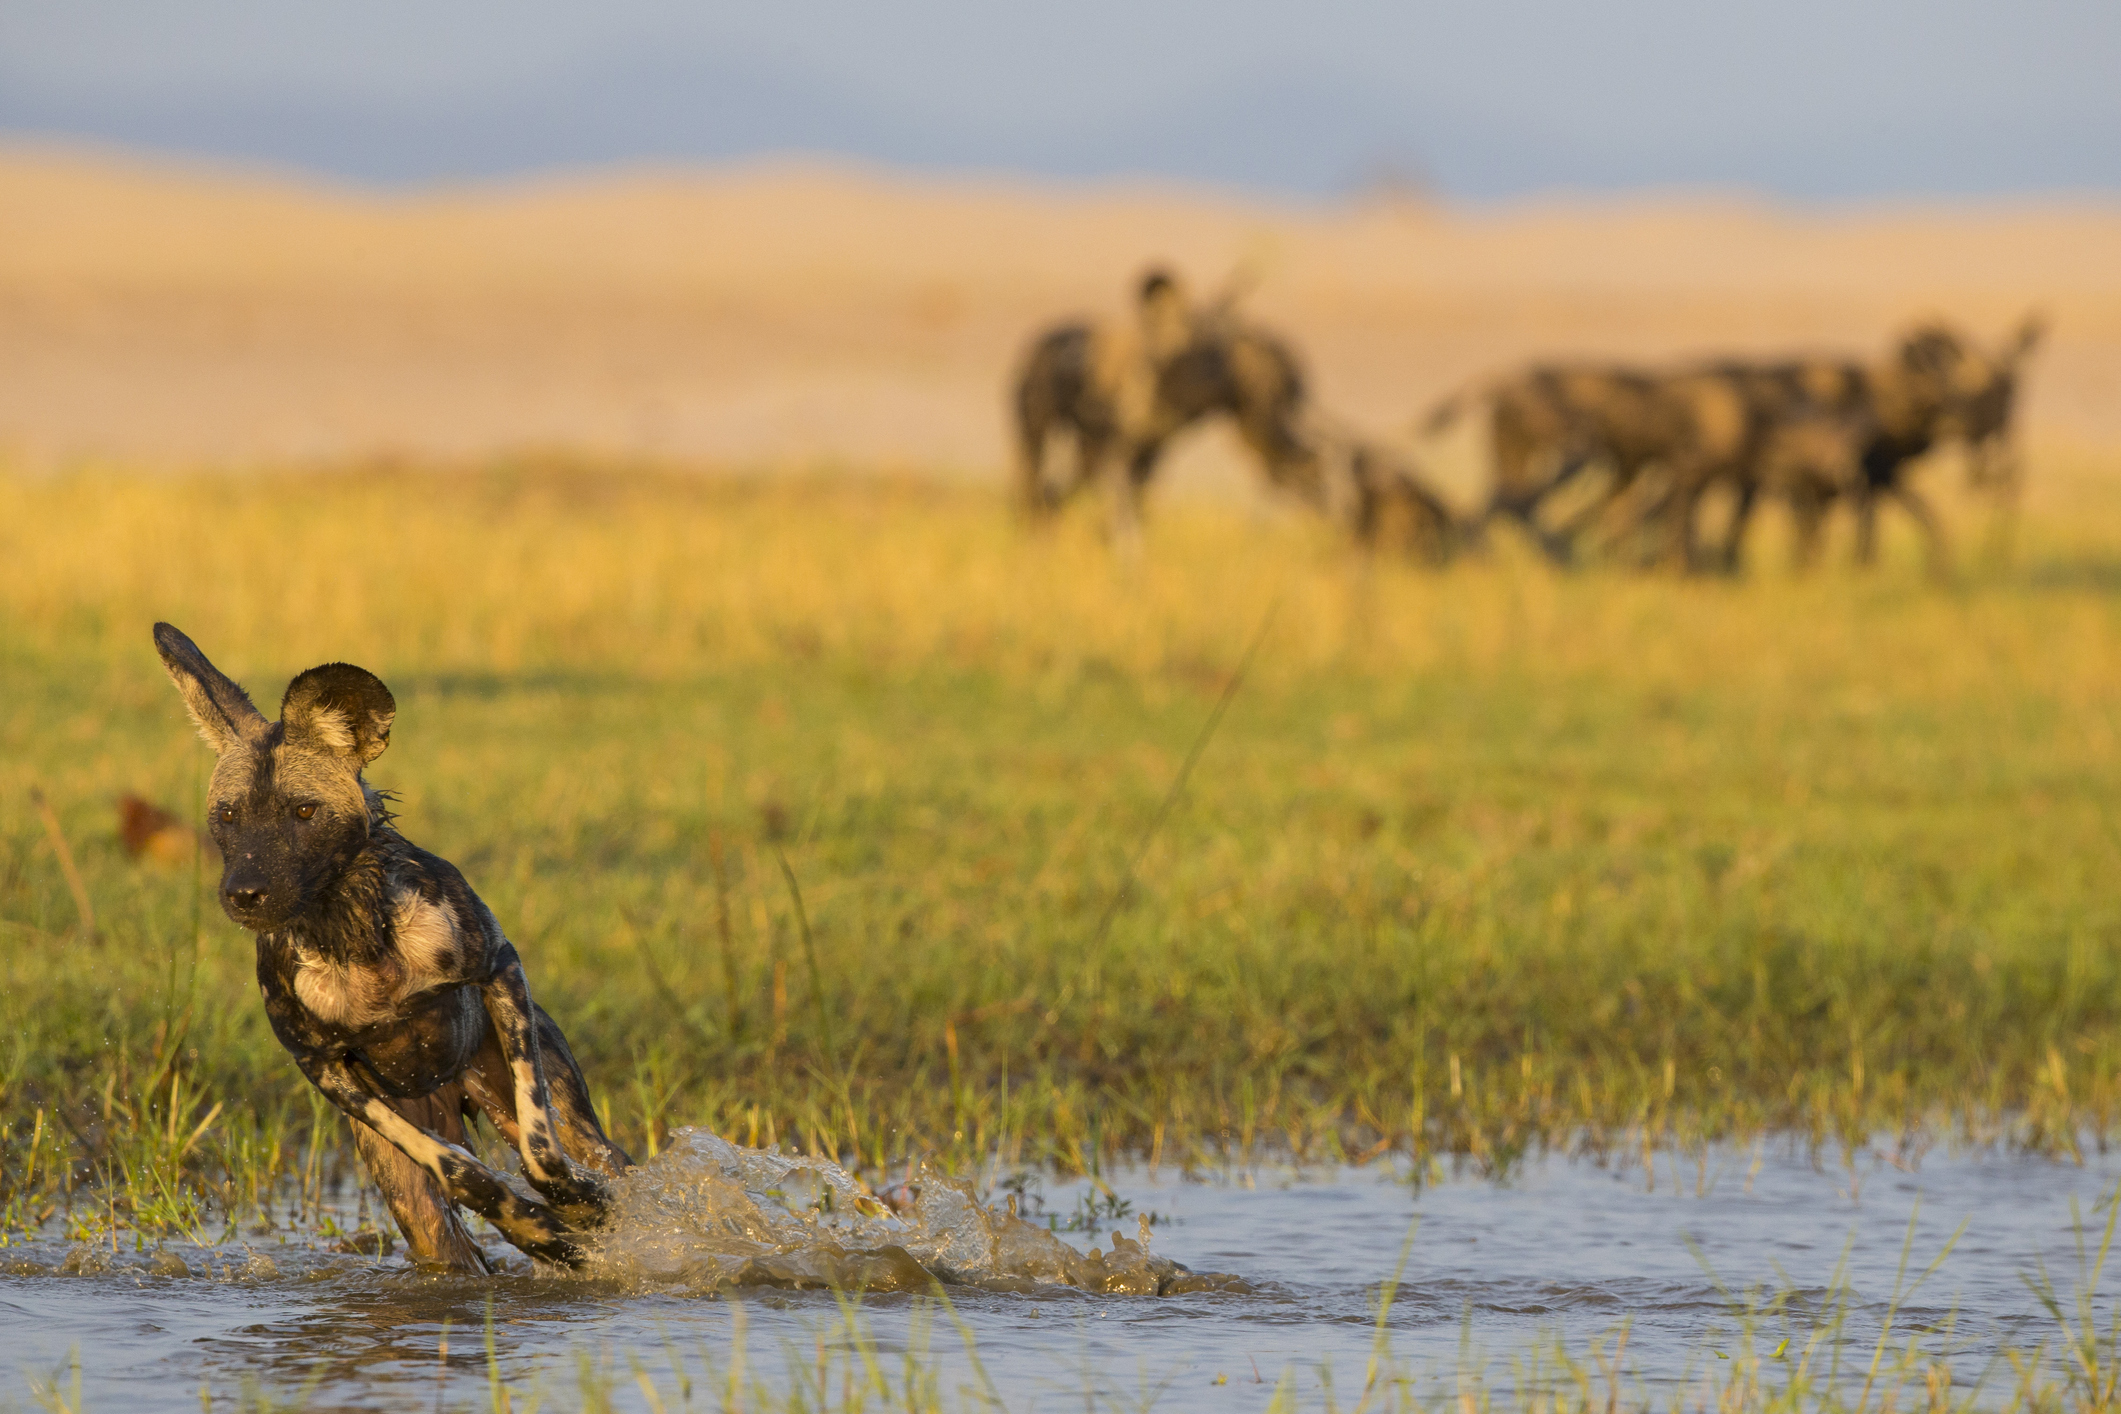 NU Borders’ BITE Platform uses Advanced Analytics to Support Anti-Poaching in Southern Africa